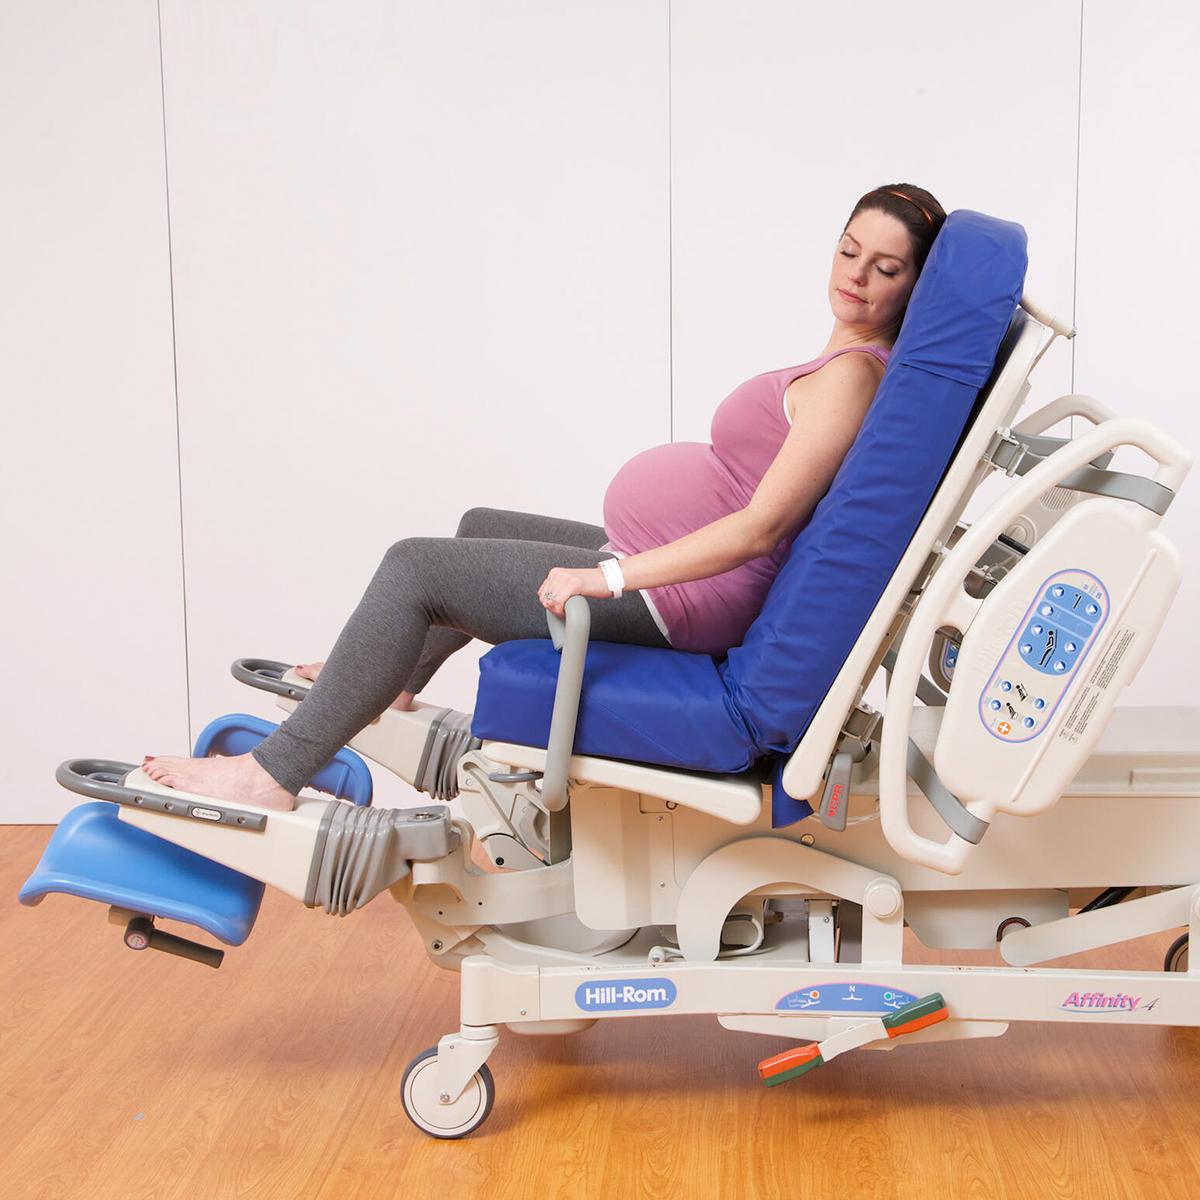 A pregnant woman reclines in an Affinity 4 Birthing Bed in an upright sitting position